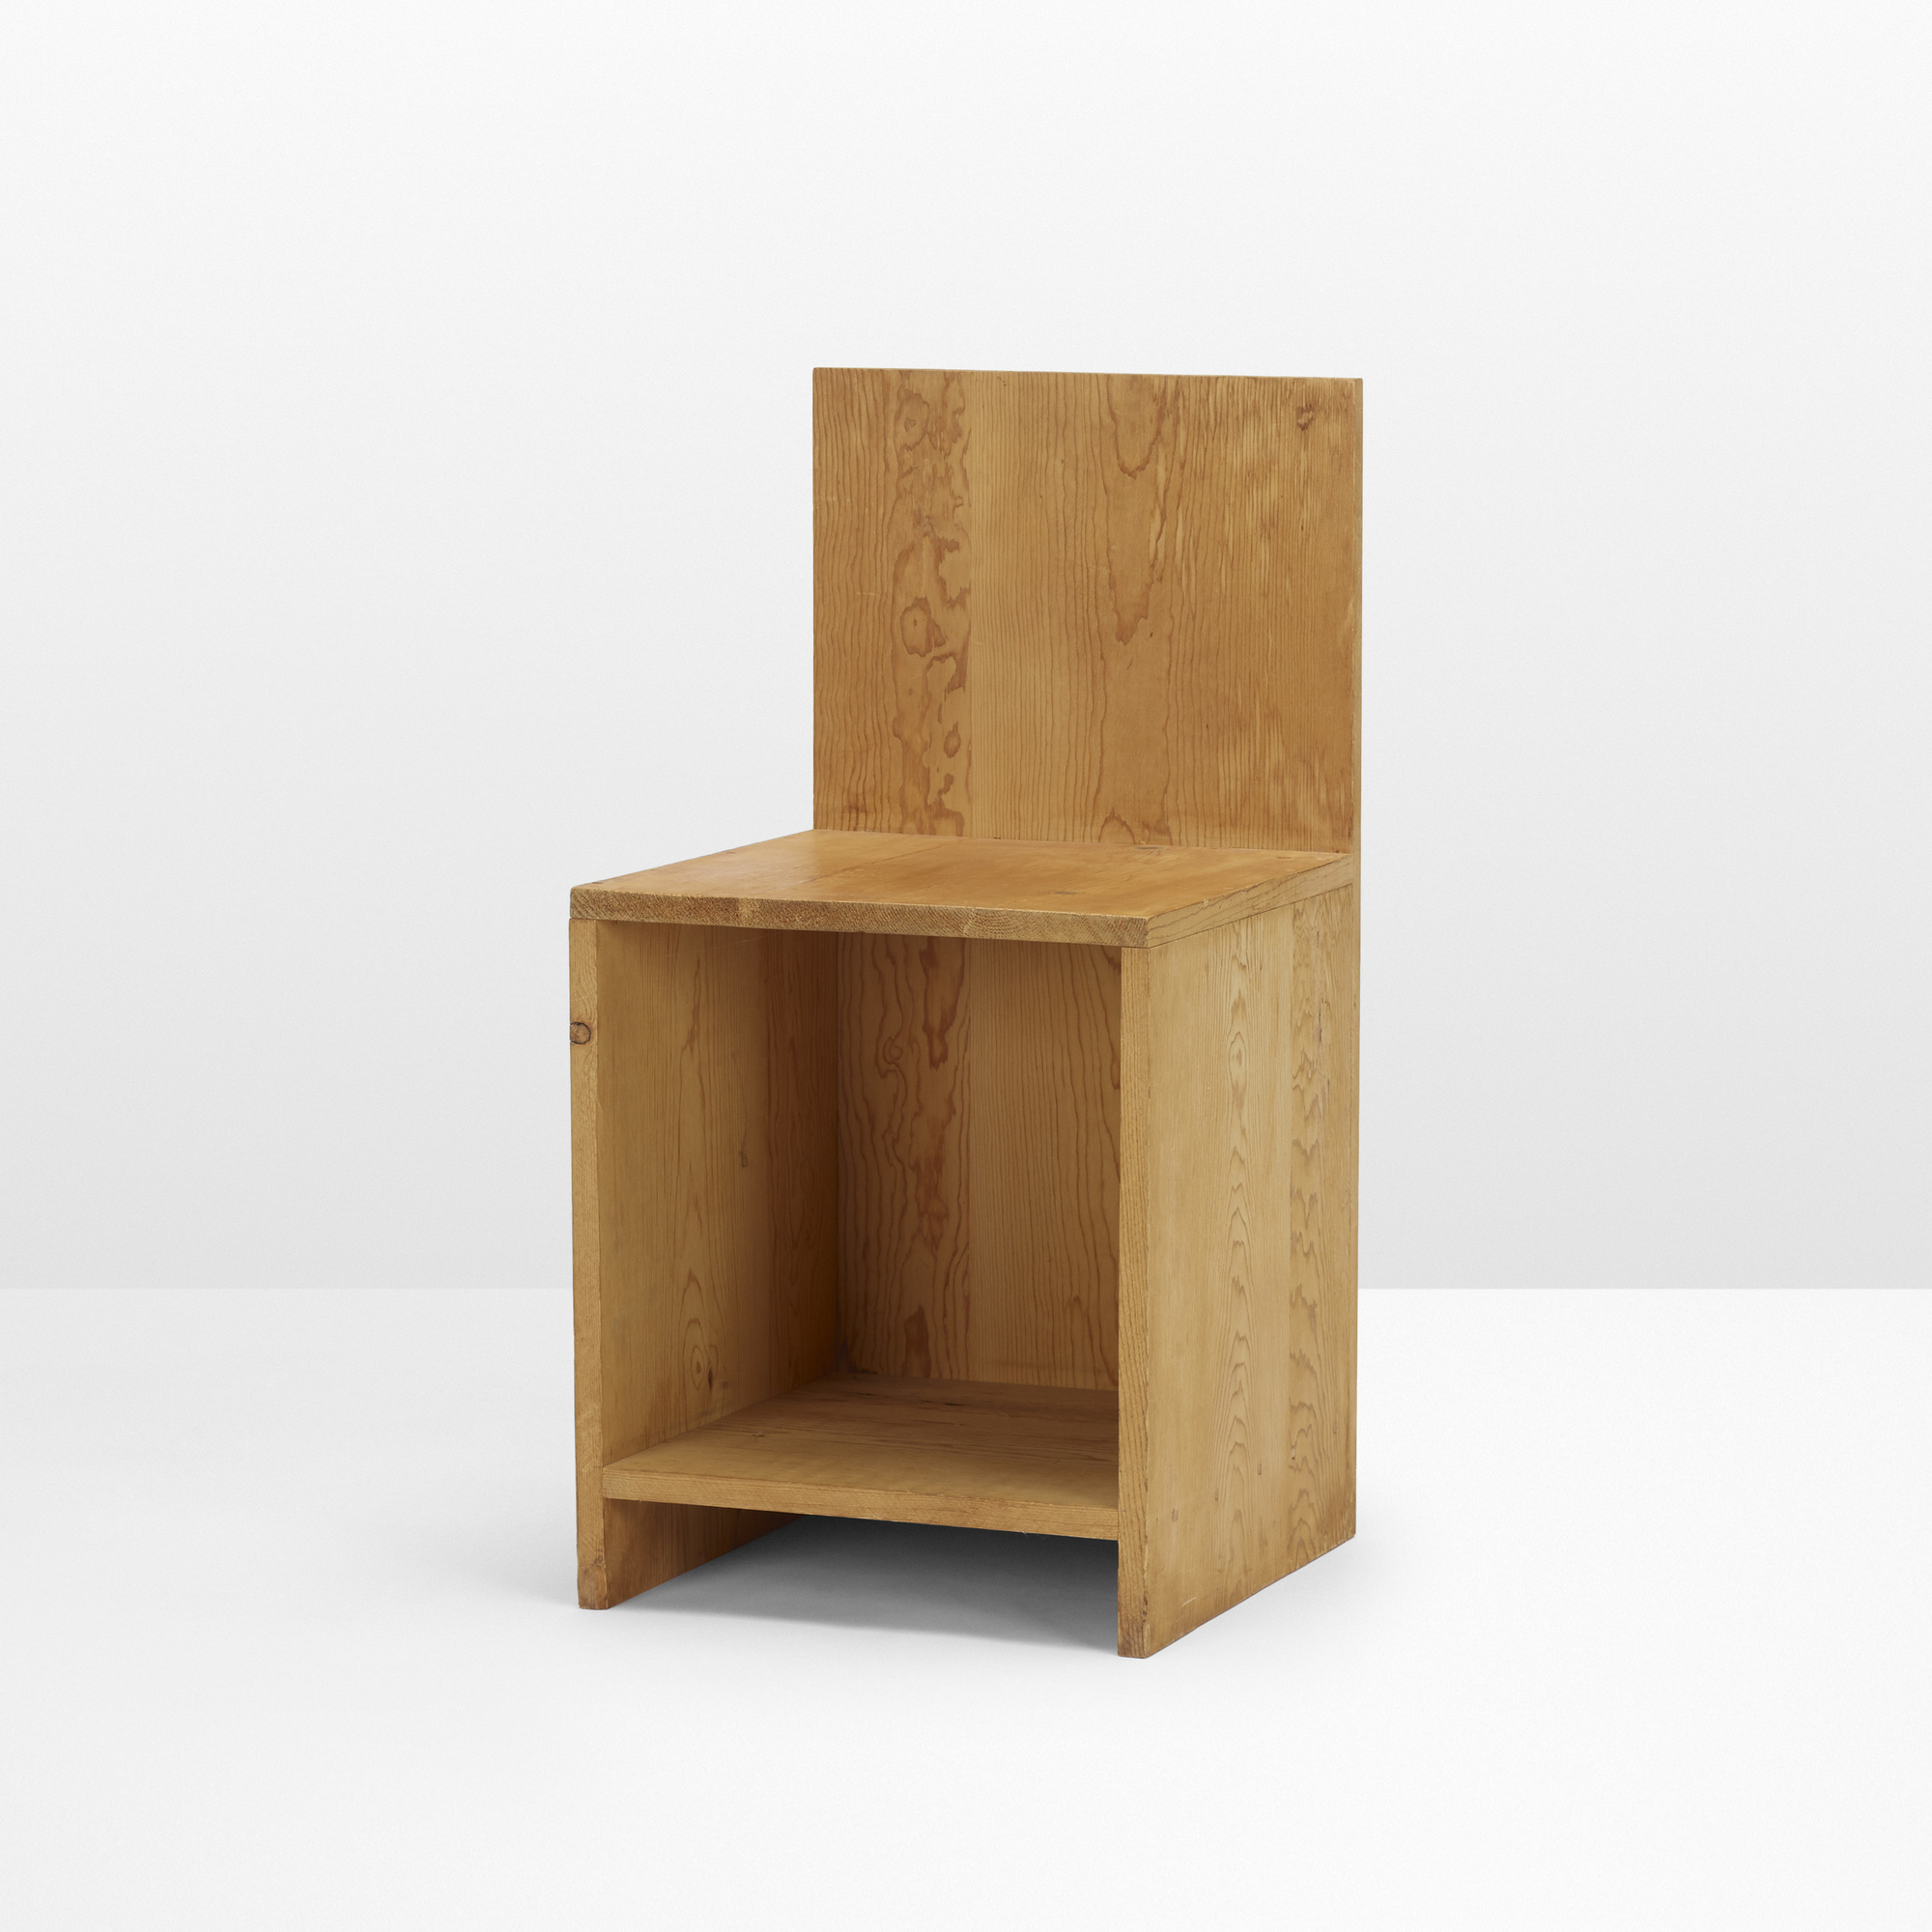 2: DONALD JUDD, Early chair < The Boyd Collection – I. Masterworks